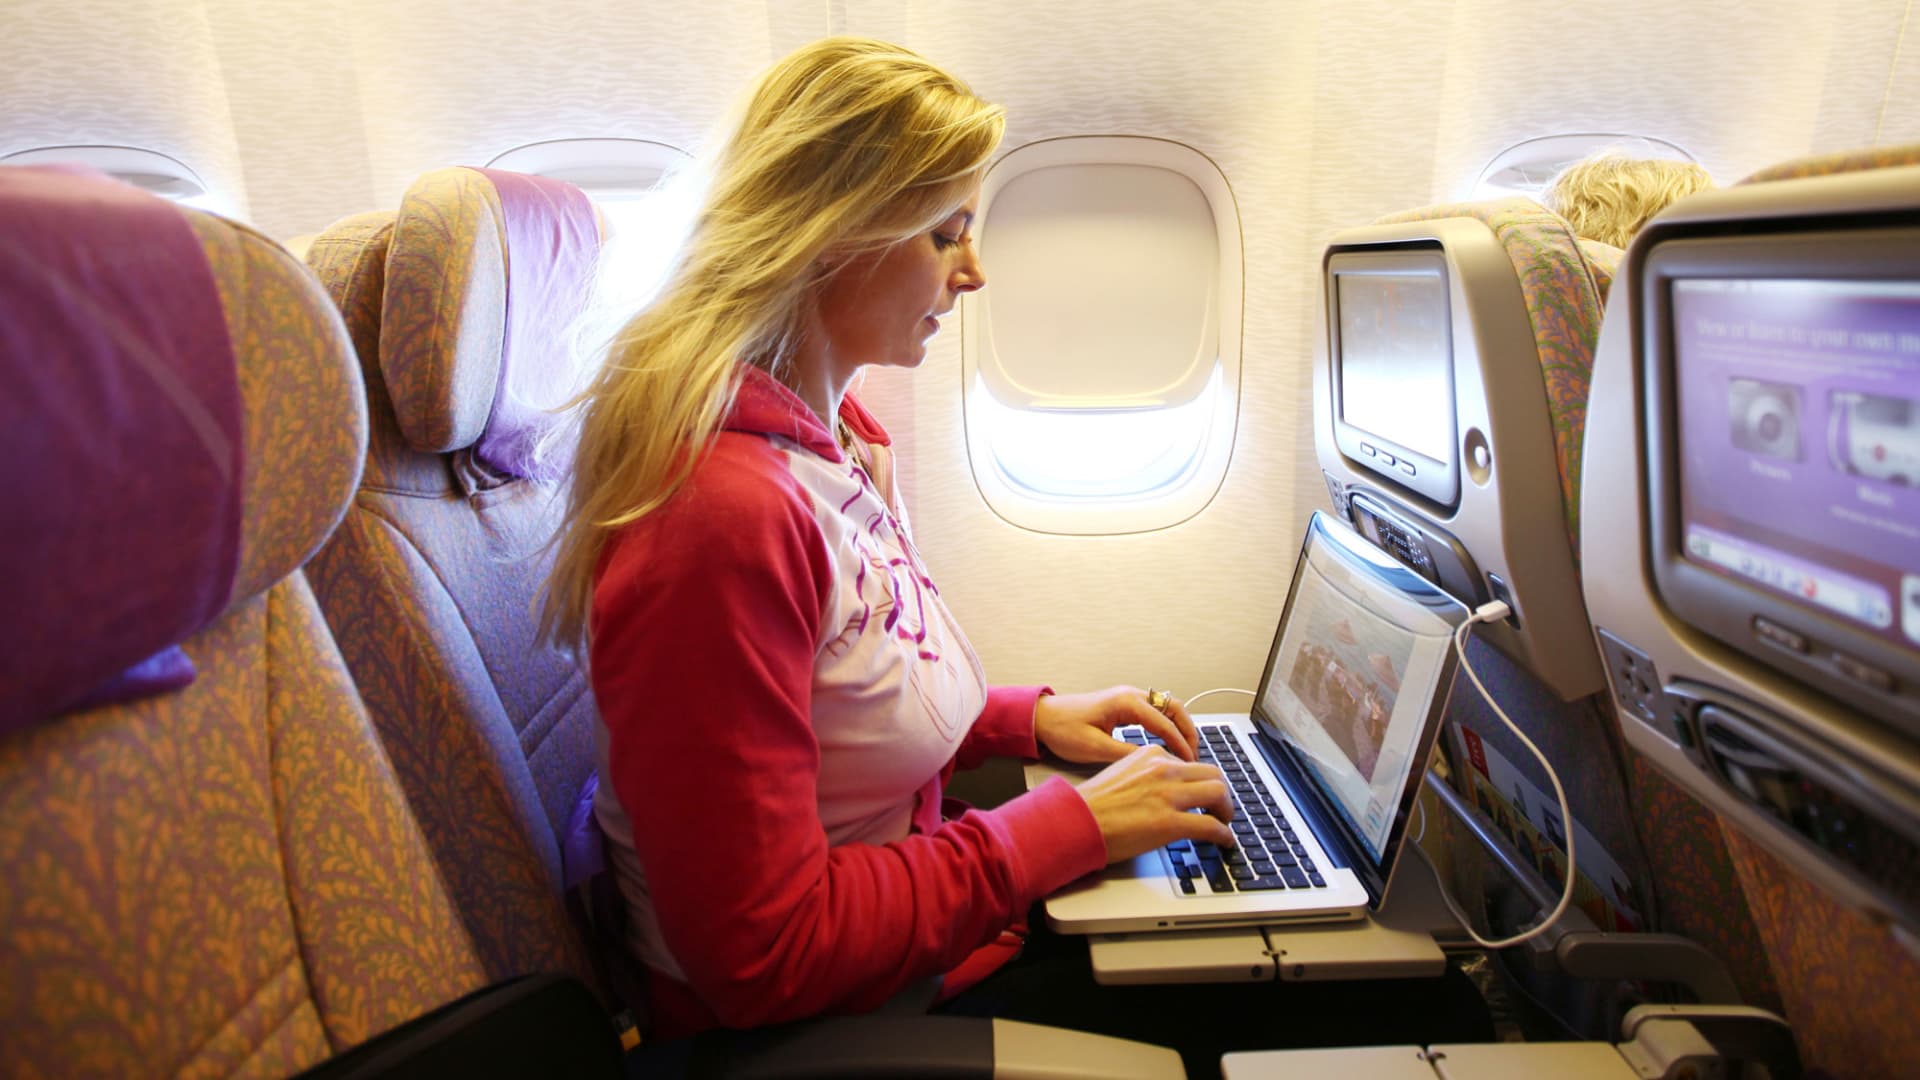 How to Get Free In-Flight Wi-Fi